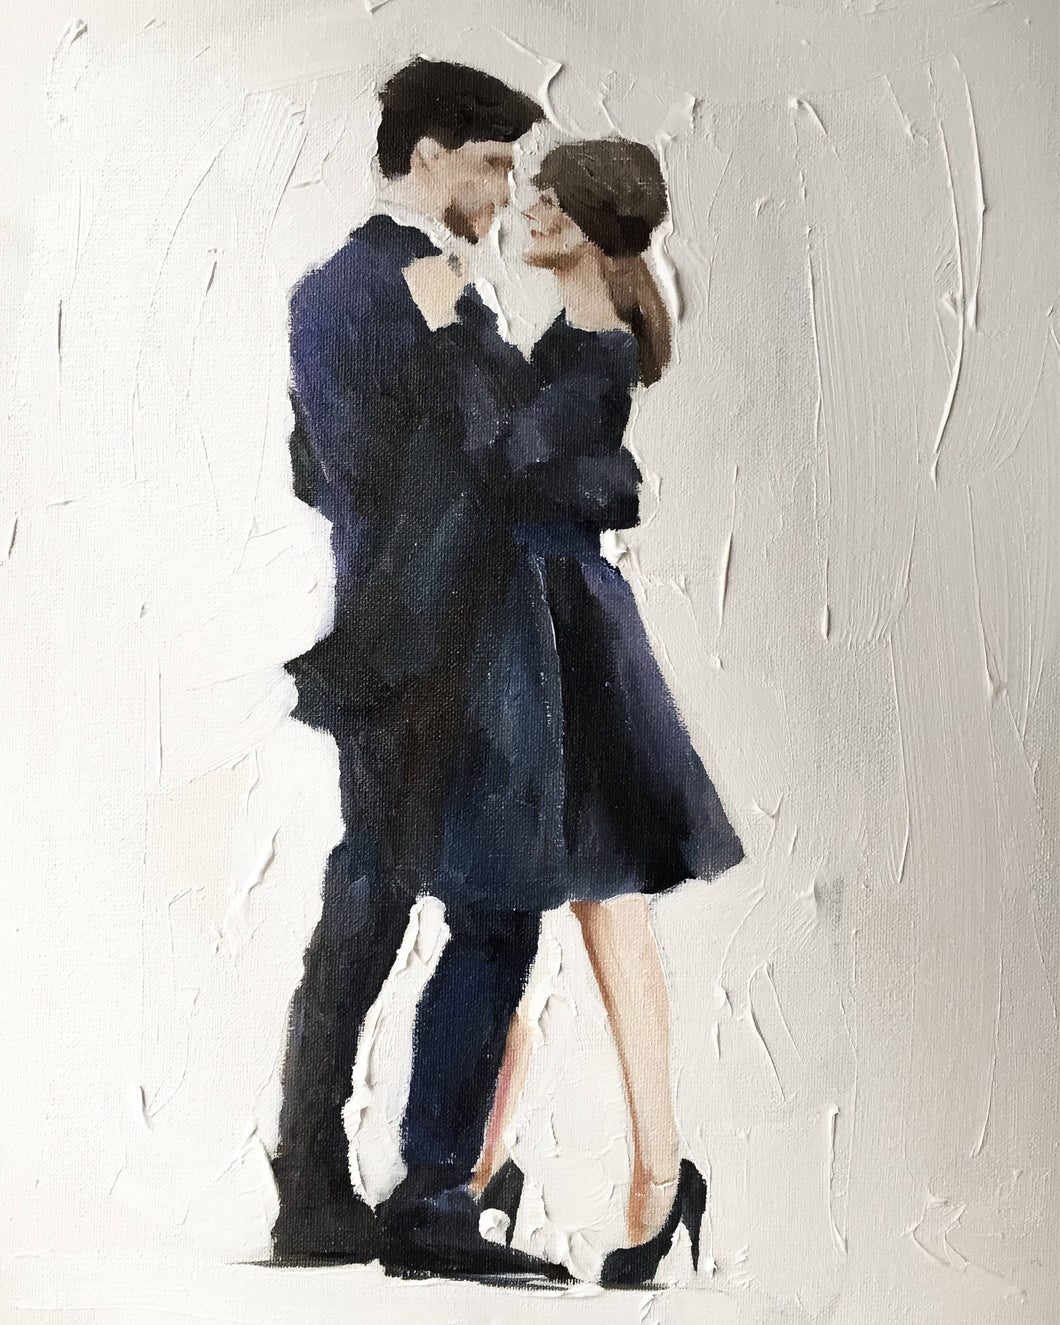 Couple dancing Painting,Poster, Prints, Originals, Commissions, Fine Art - from original oil painting by James Coates